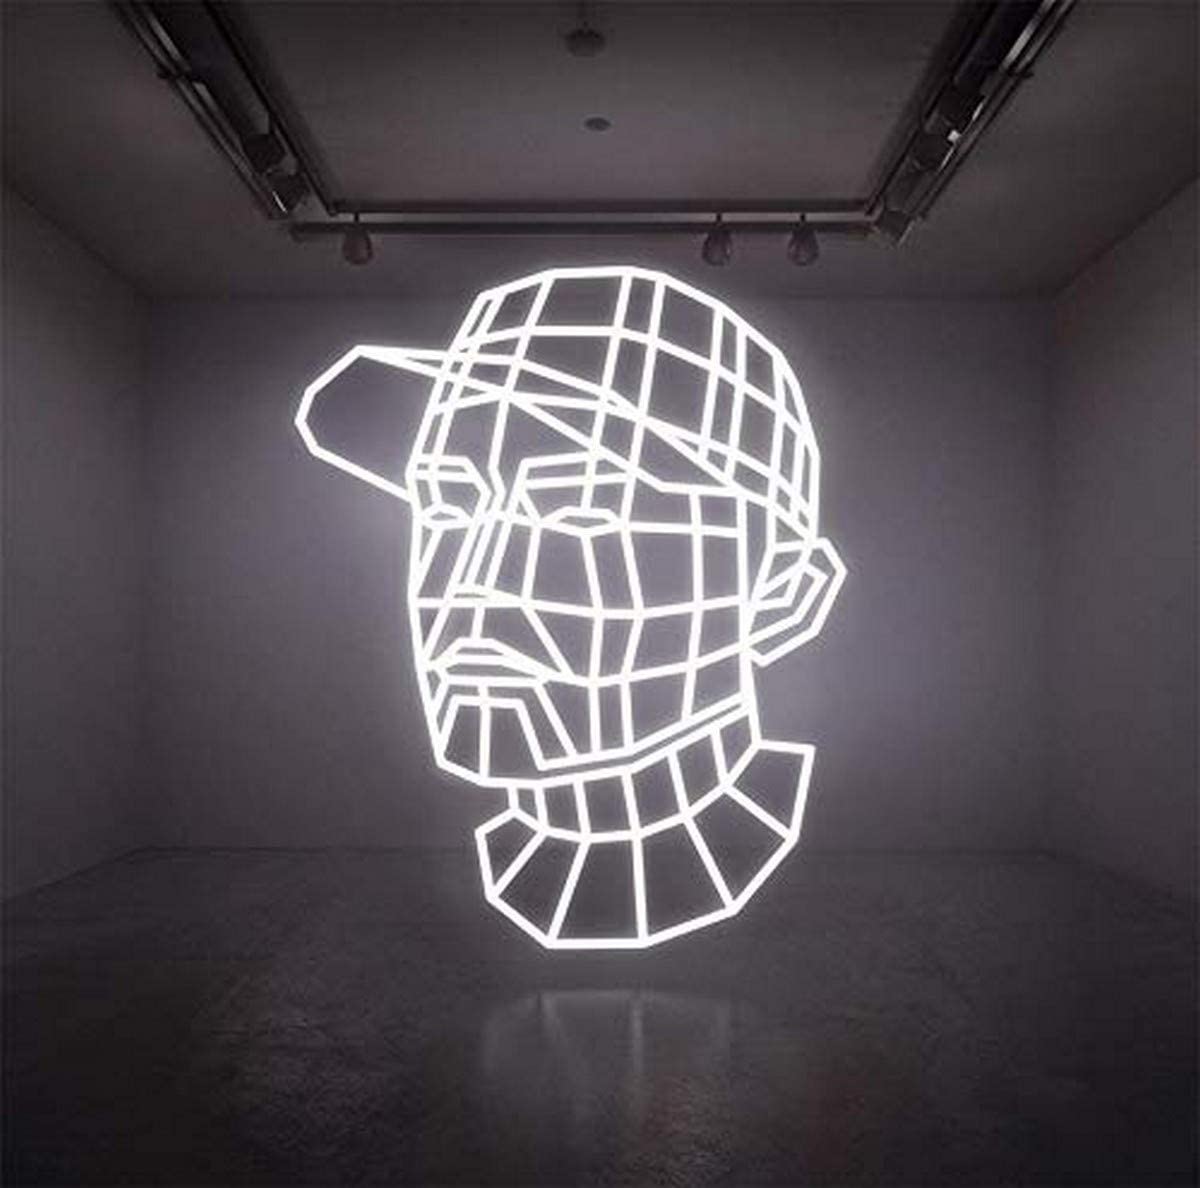 Reconstructed is DJ Shadow's first Best Of collection on Vinyl. It spans the musician's 23-year career, featuring tracks from his five studio albums as well as collaborations with the likes of James Lavelle, Richard Ashcroft and Thom Yorke. 